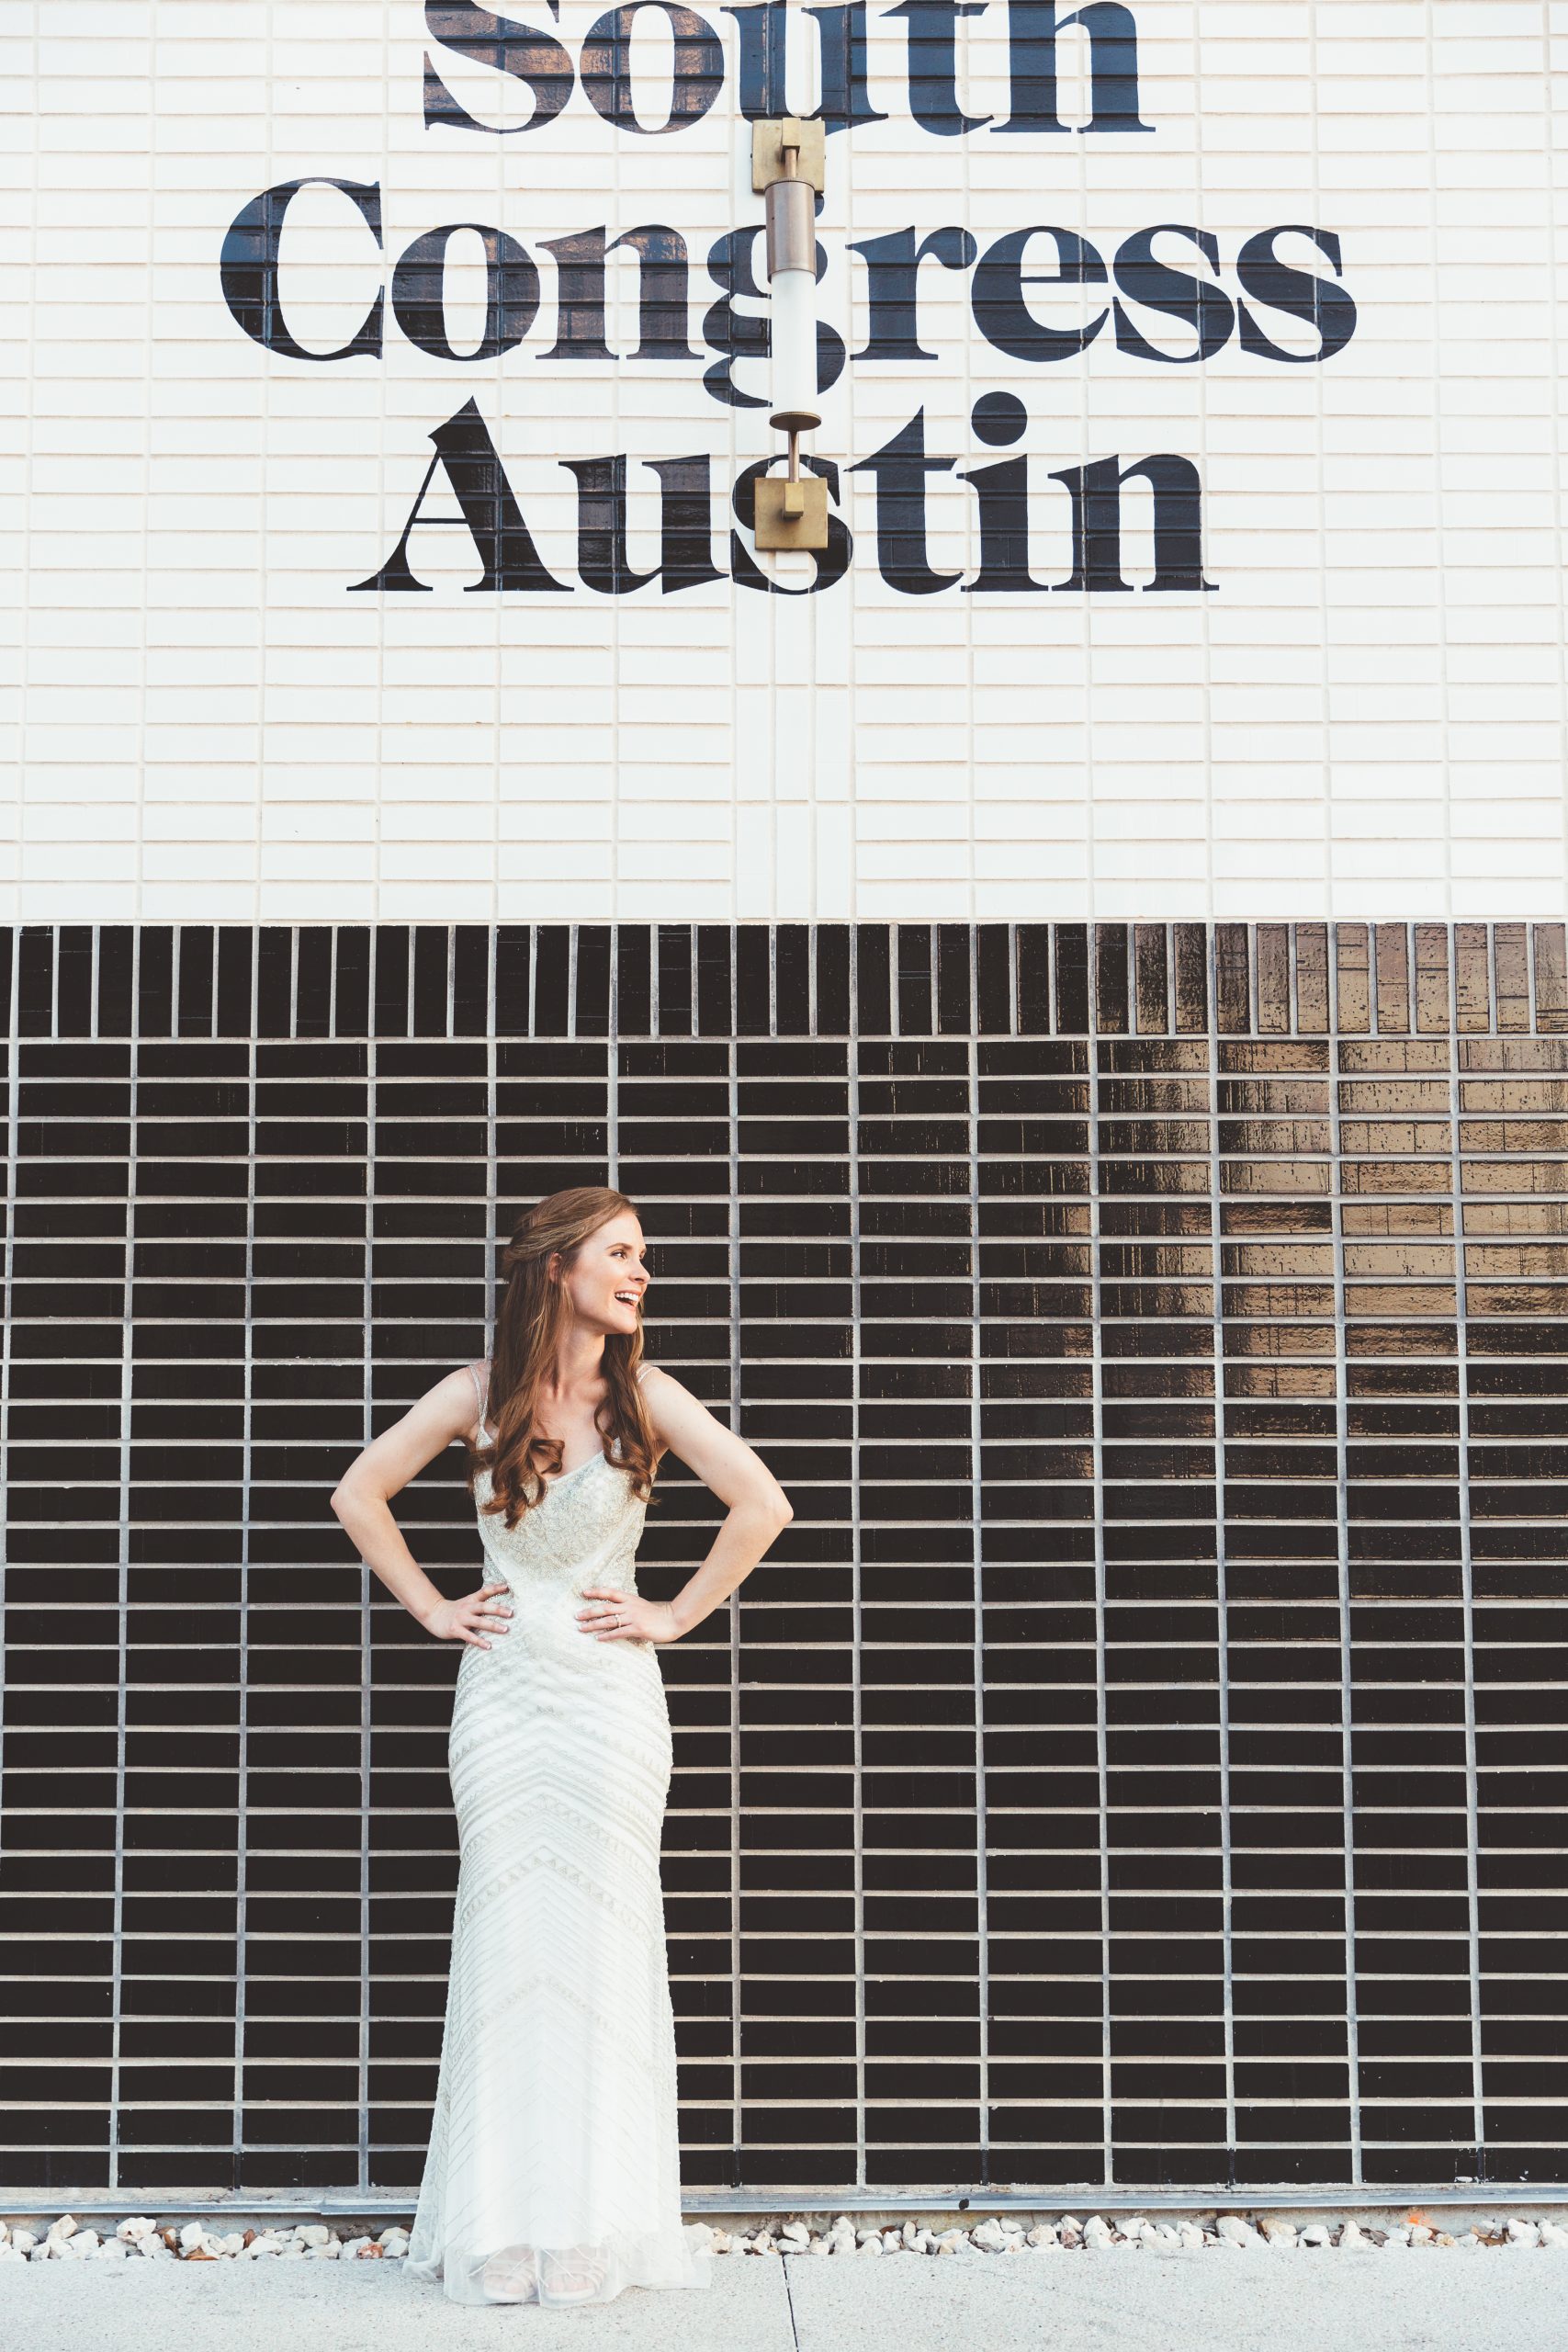 Michelle's Bridal Portraits taken at the South Congress Hotel, Austin, Texas.